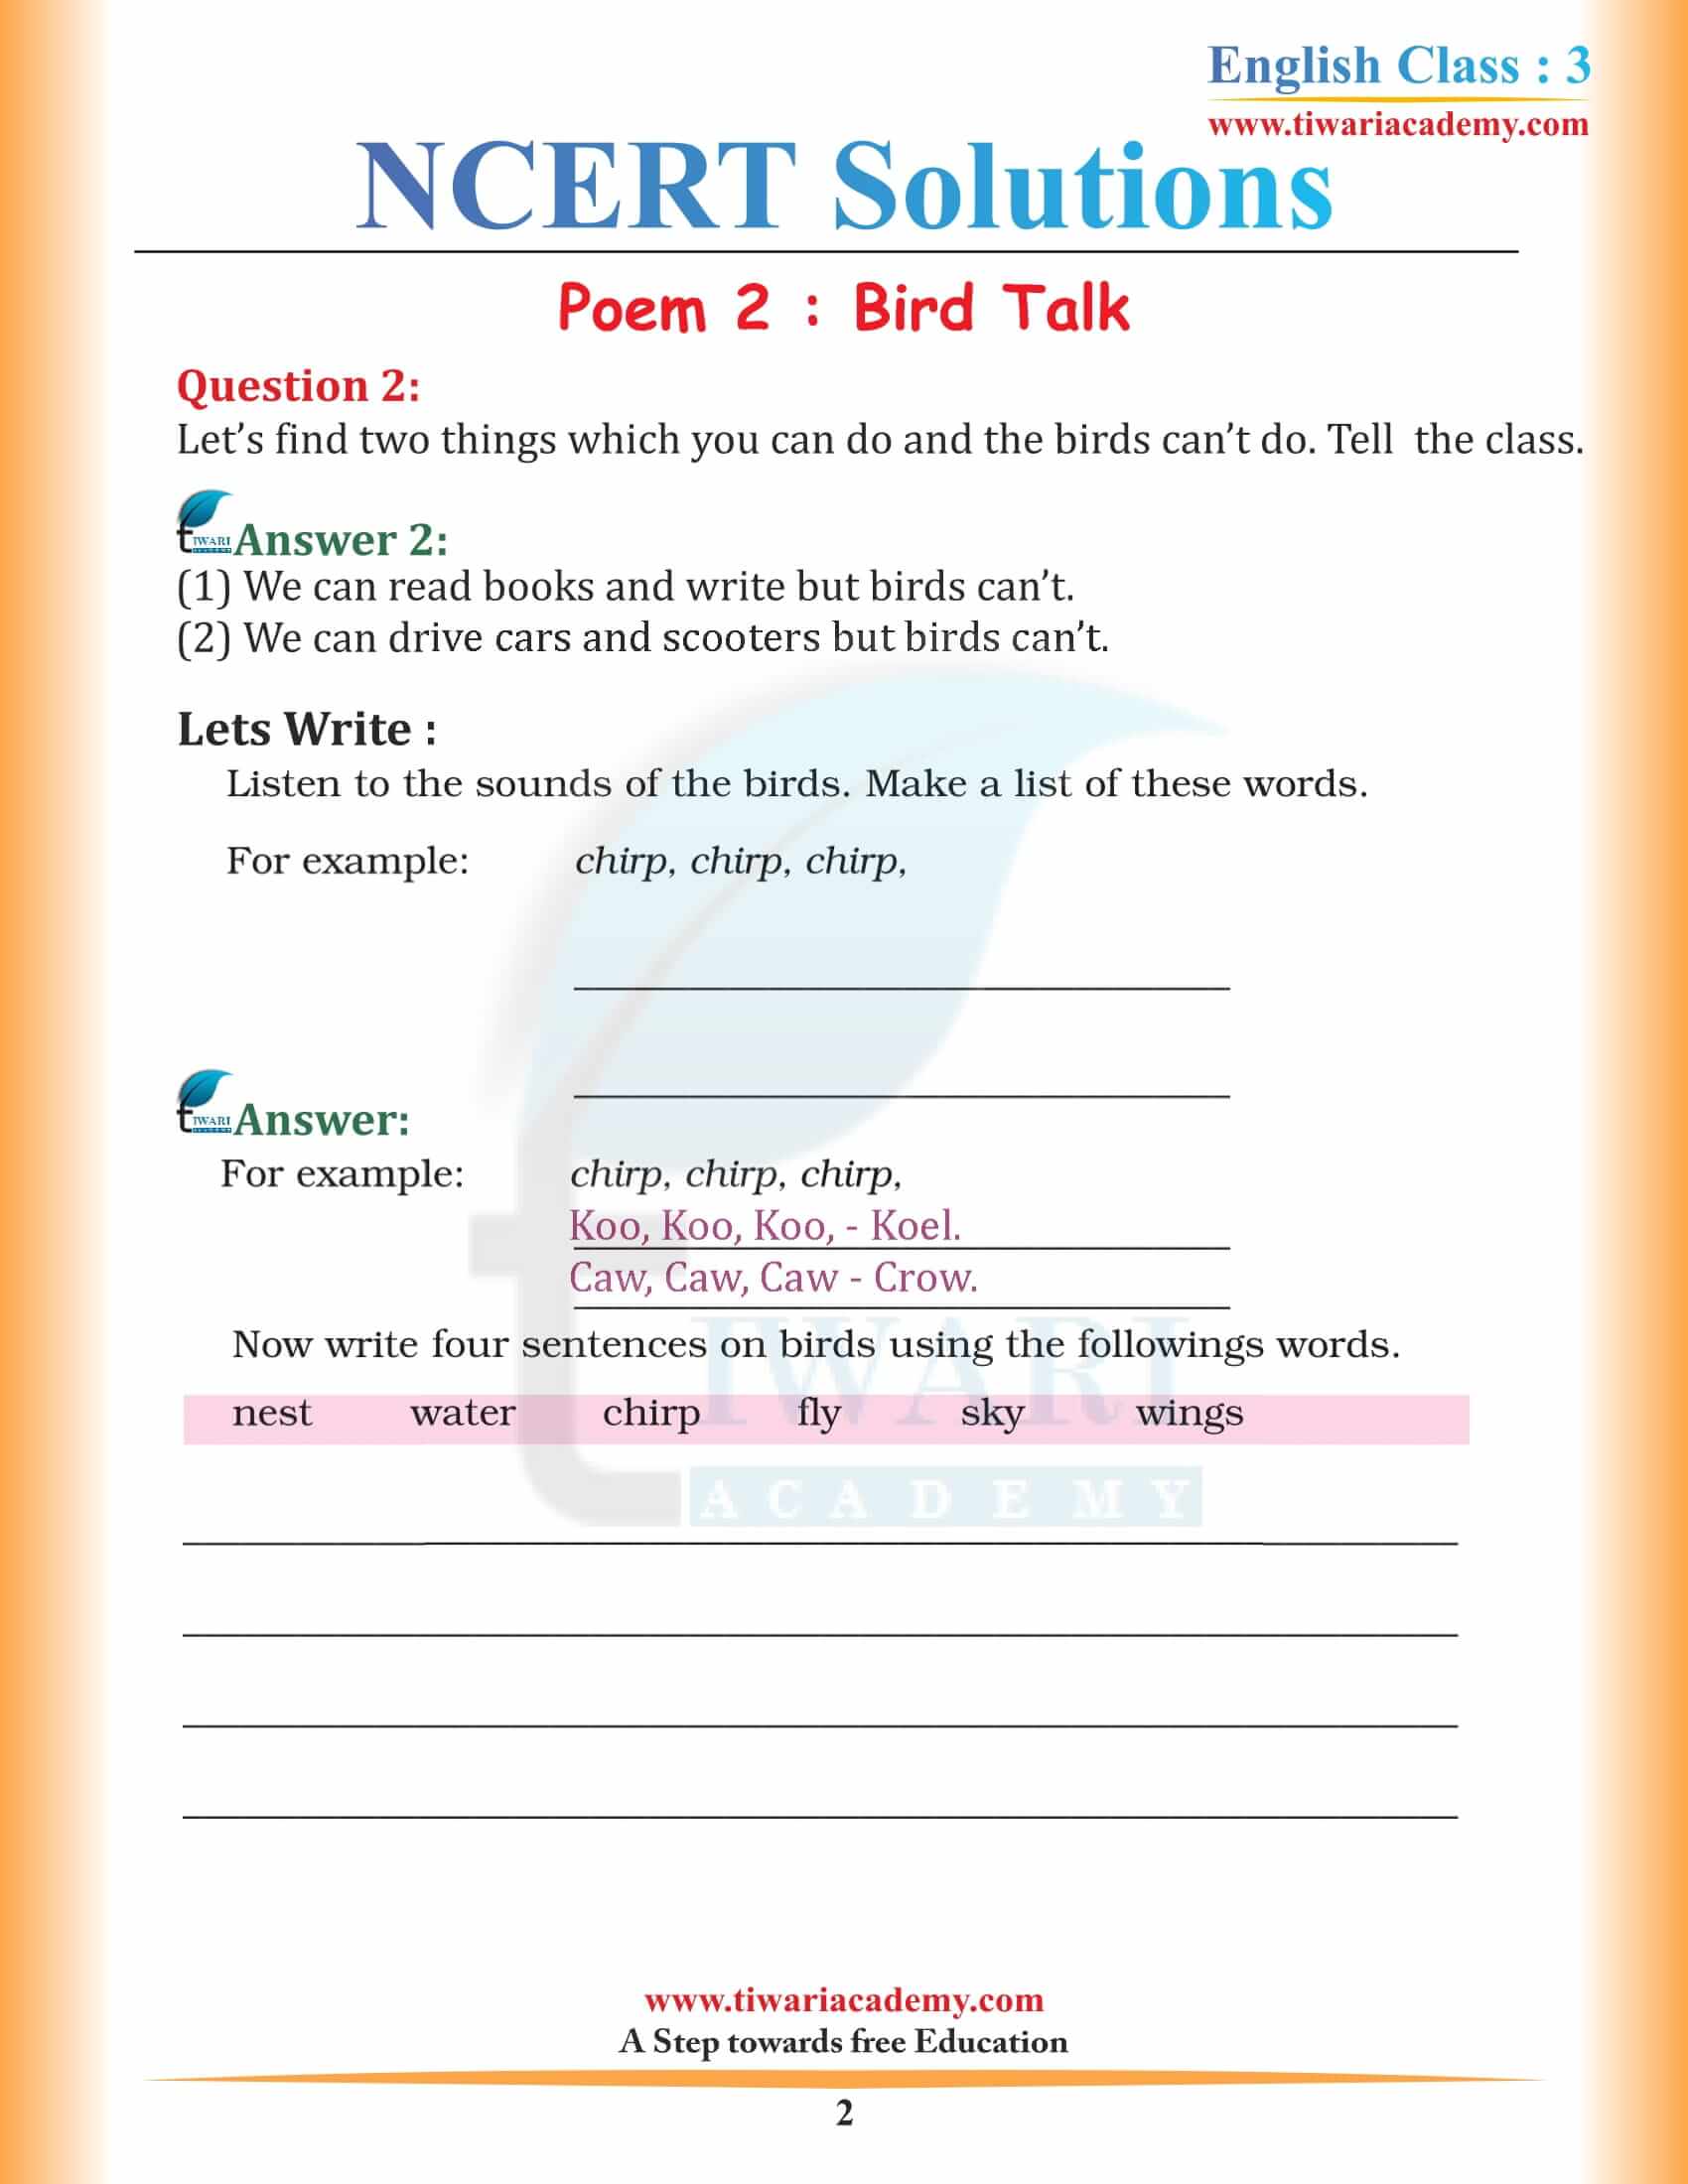 NCERT Solutions for Class 3 English Marigold 3 Unit 2